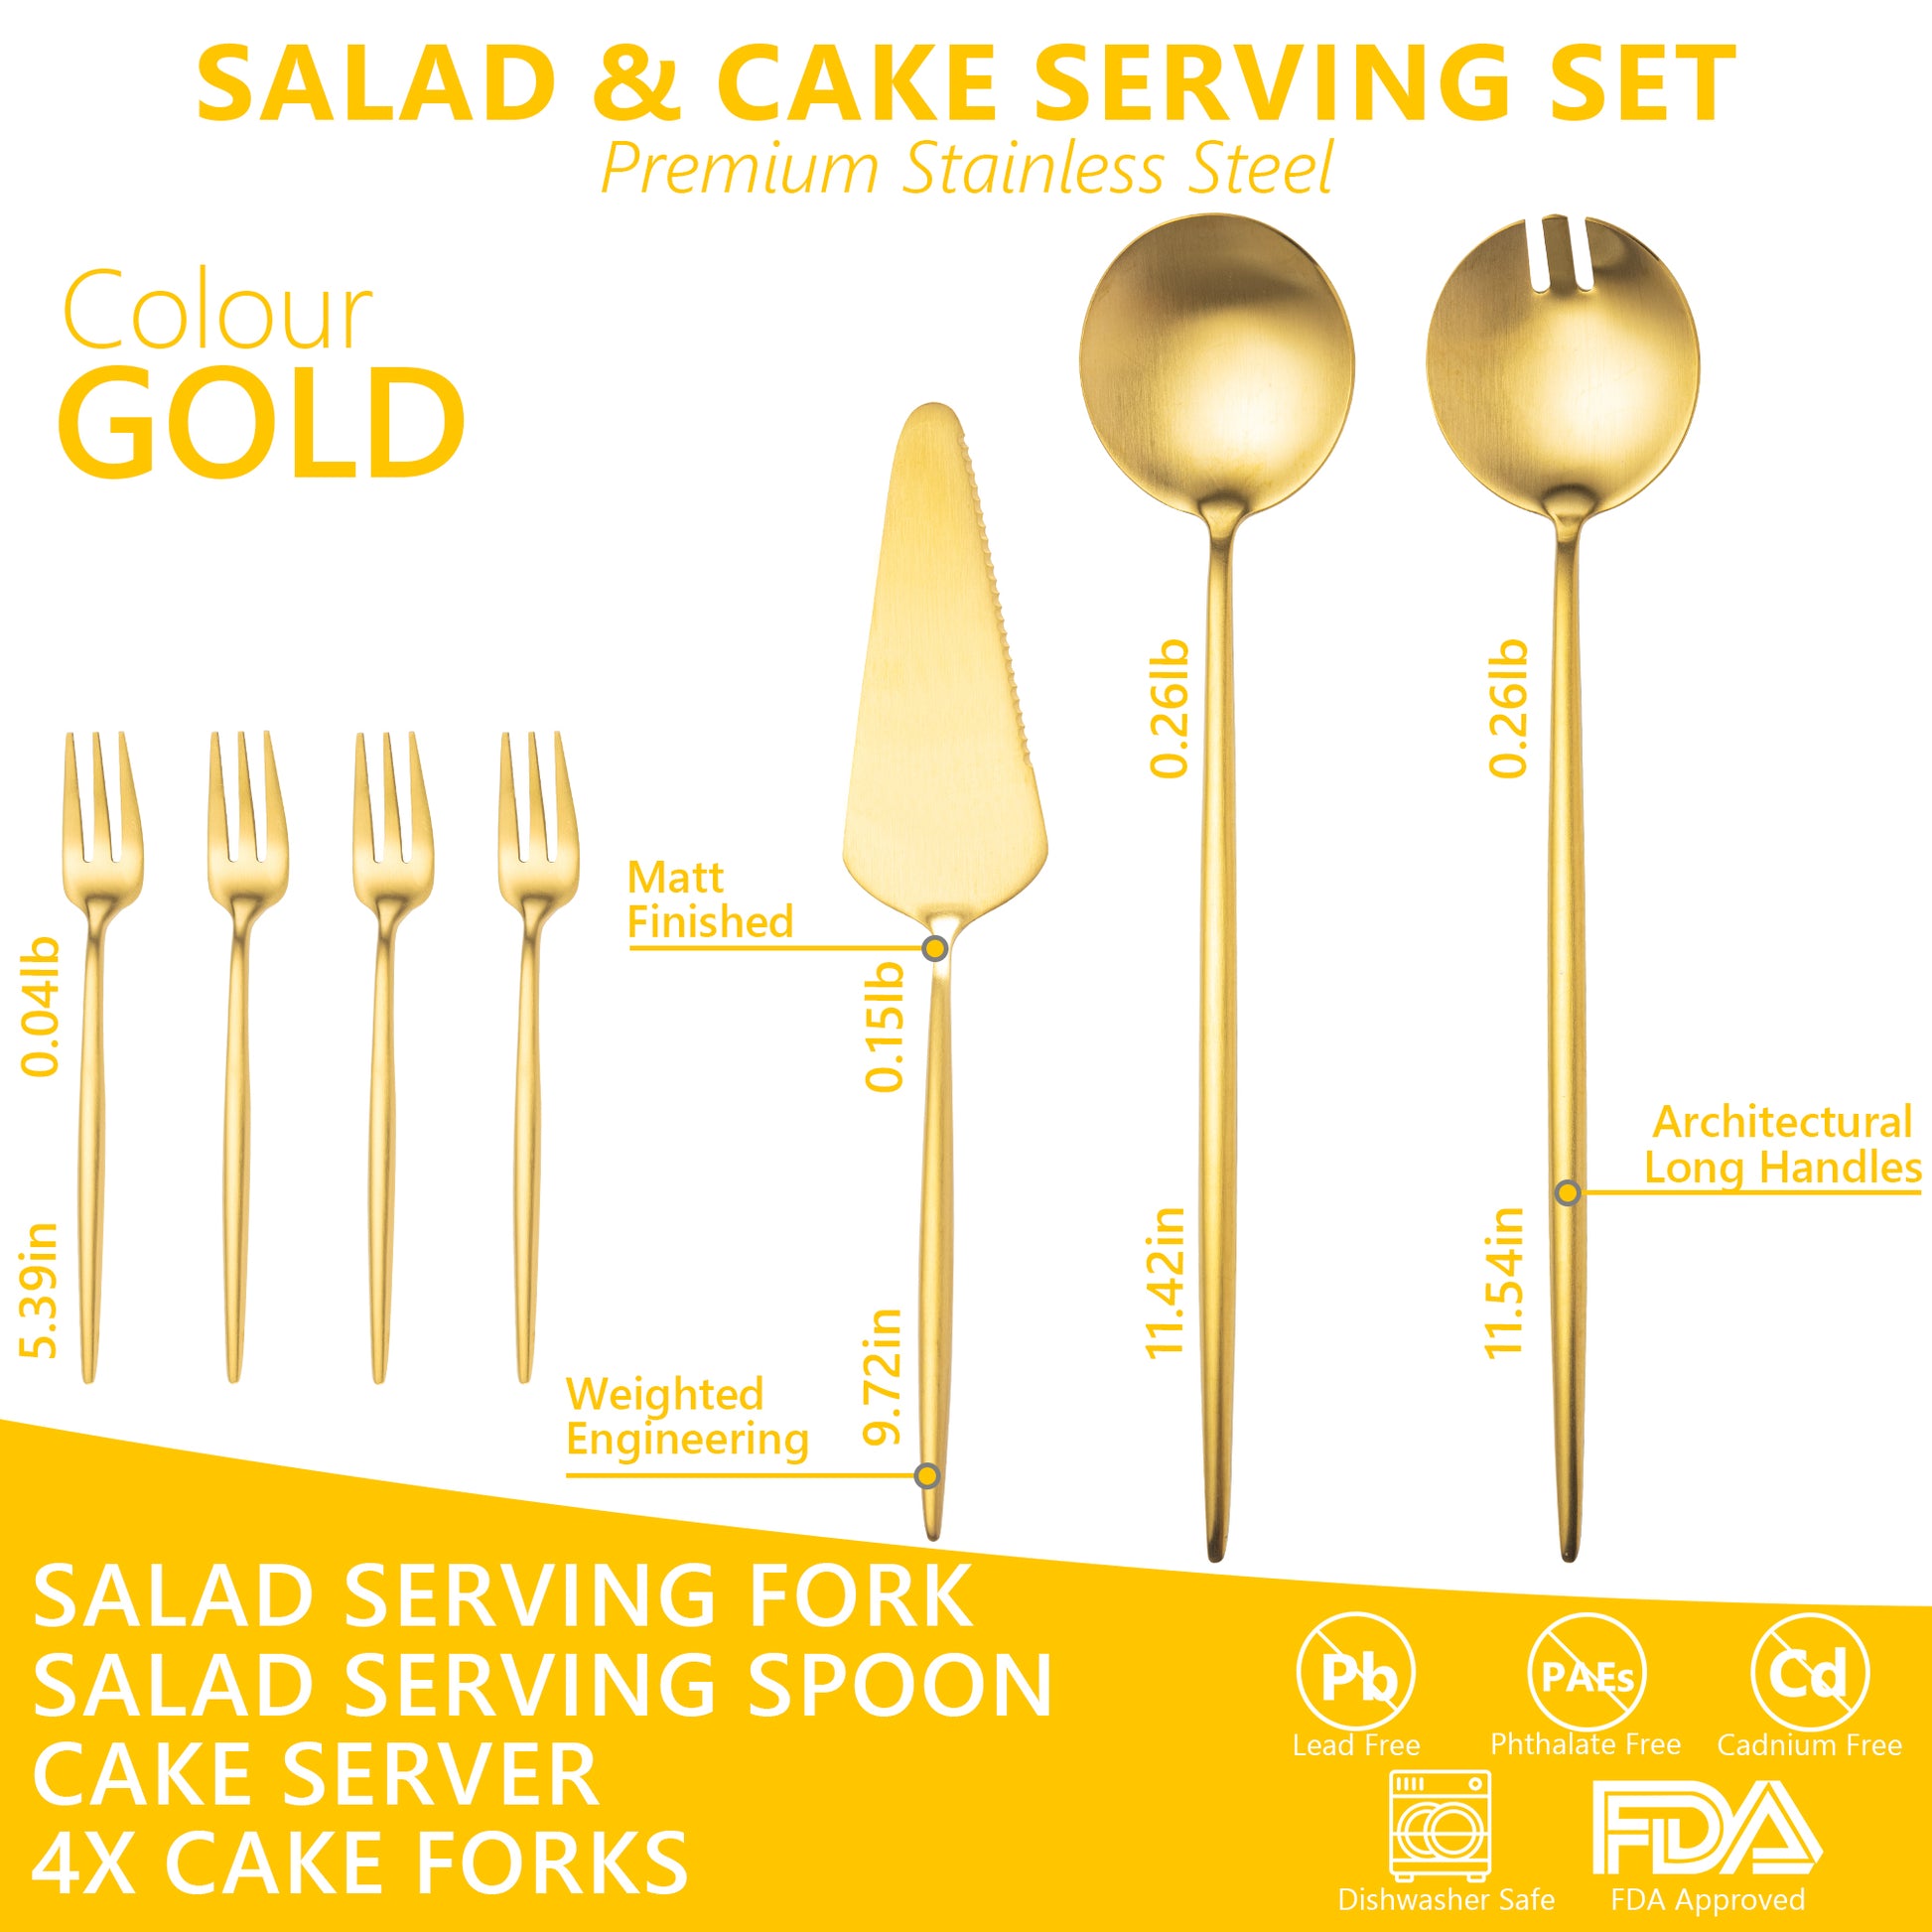 gold serving utensils gifts dinnerware accessories golden serving spoons and fork spatula of 2 shiny matte gold salad server cubiertos de acero inoxidable juegos de vajilla hosting party essentials flatware 1810 stainless steel home essentials kitchen ware serveware flatware set silverware cutlery pasta Christmas silverwear xmas high tea comically large spoon wedding decorations wedding registry search must have amazon wishlist  apartment essentials silverware kitchen essential accessories silverwear wear